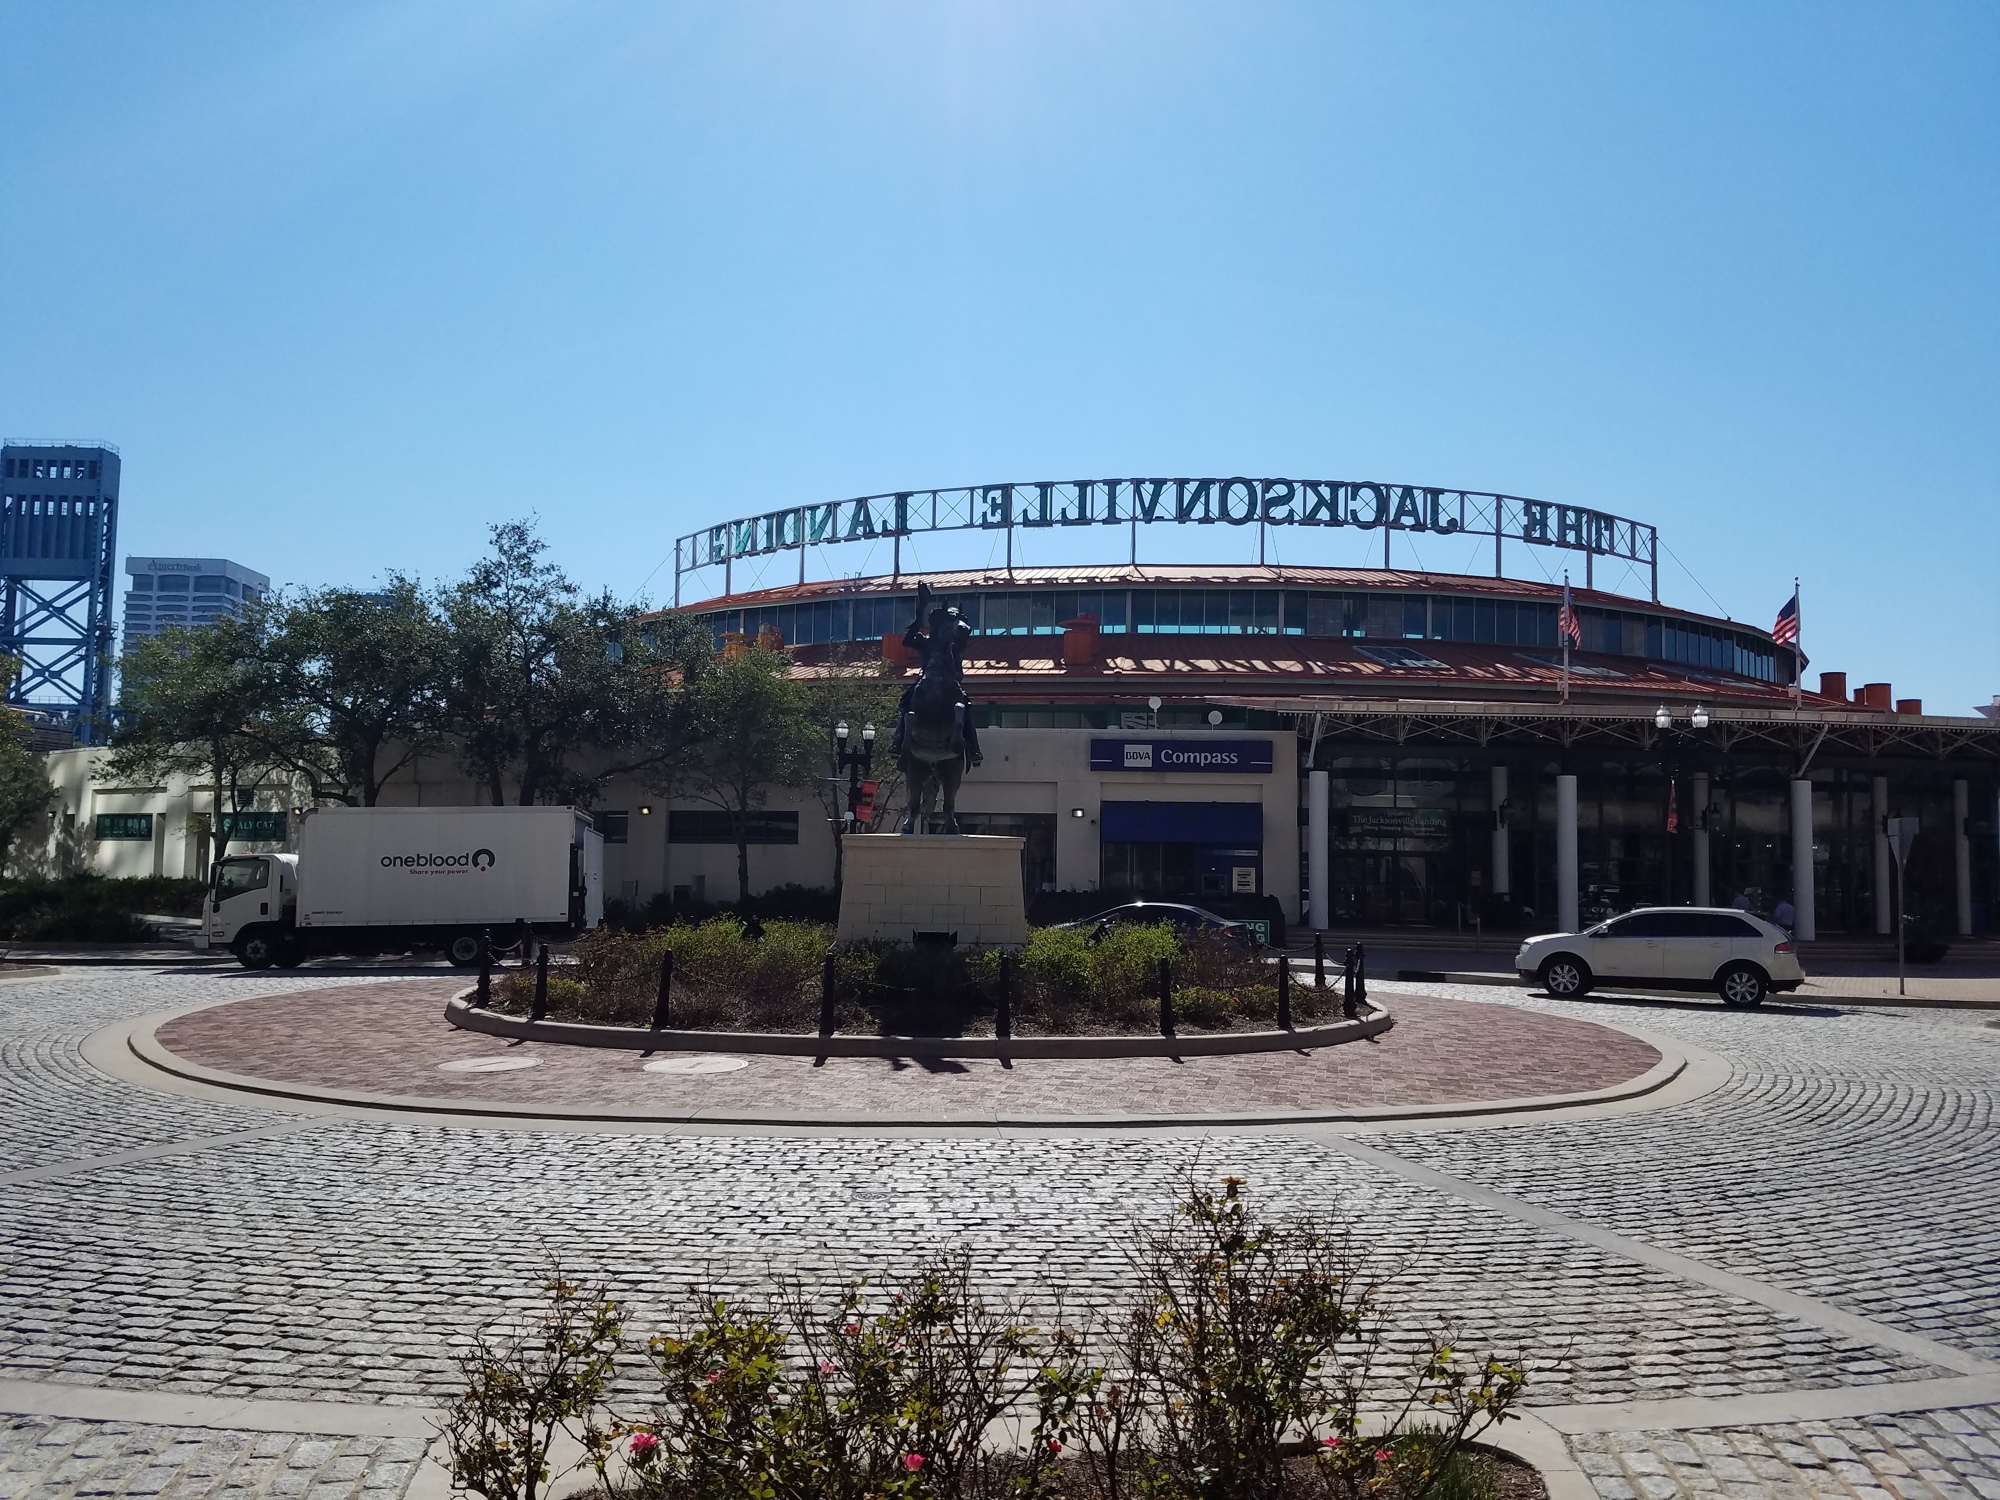 The lawsuit filed by Sleiman Enterprises claims the  roundabout at the corner of Laura Street and Independent Drive has blocked access to the mall.